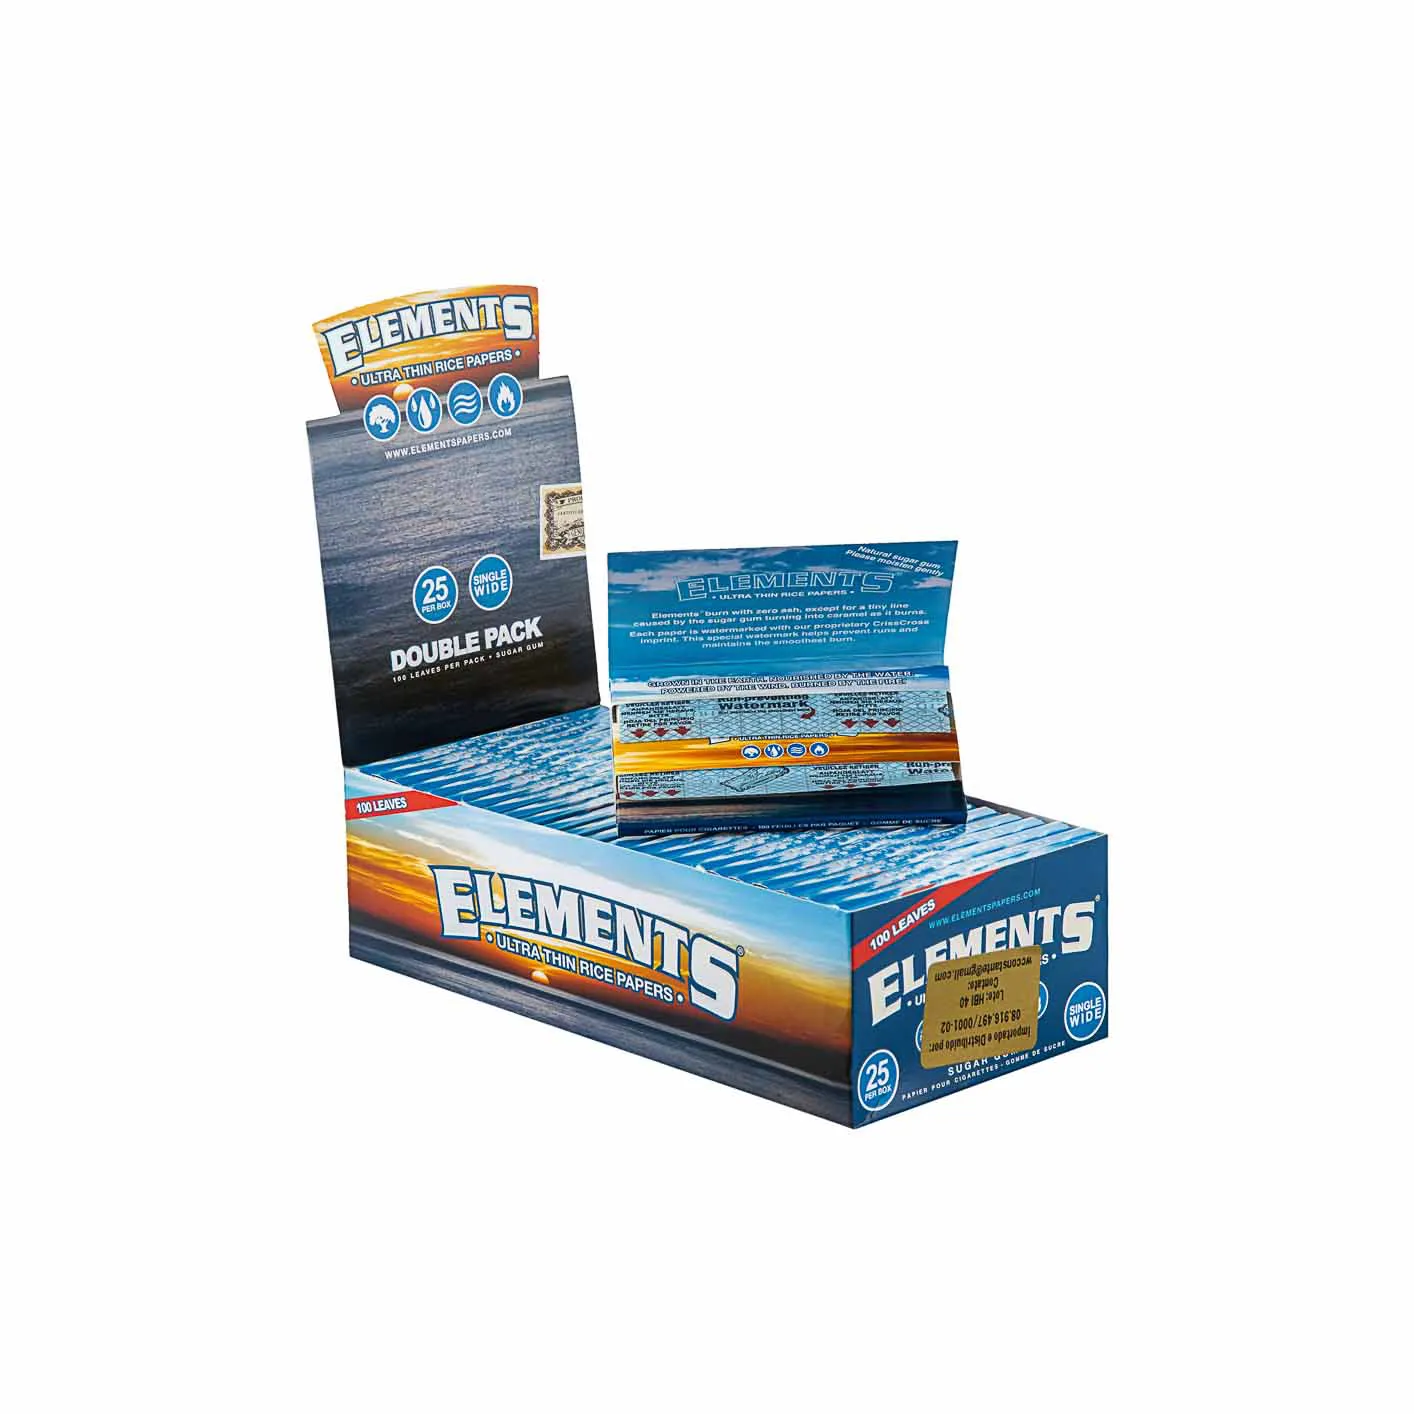 ELEMENTS SINGLE WIDE DOUBLE PACK PAPERS – 25PK